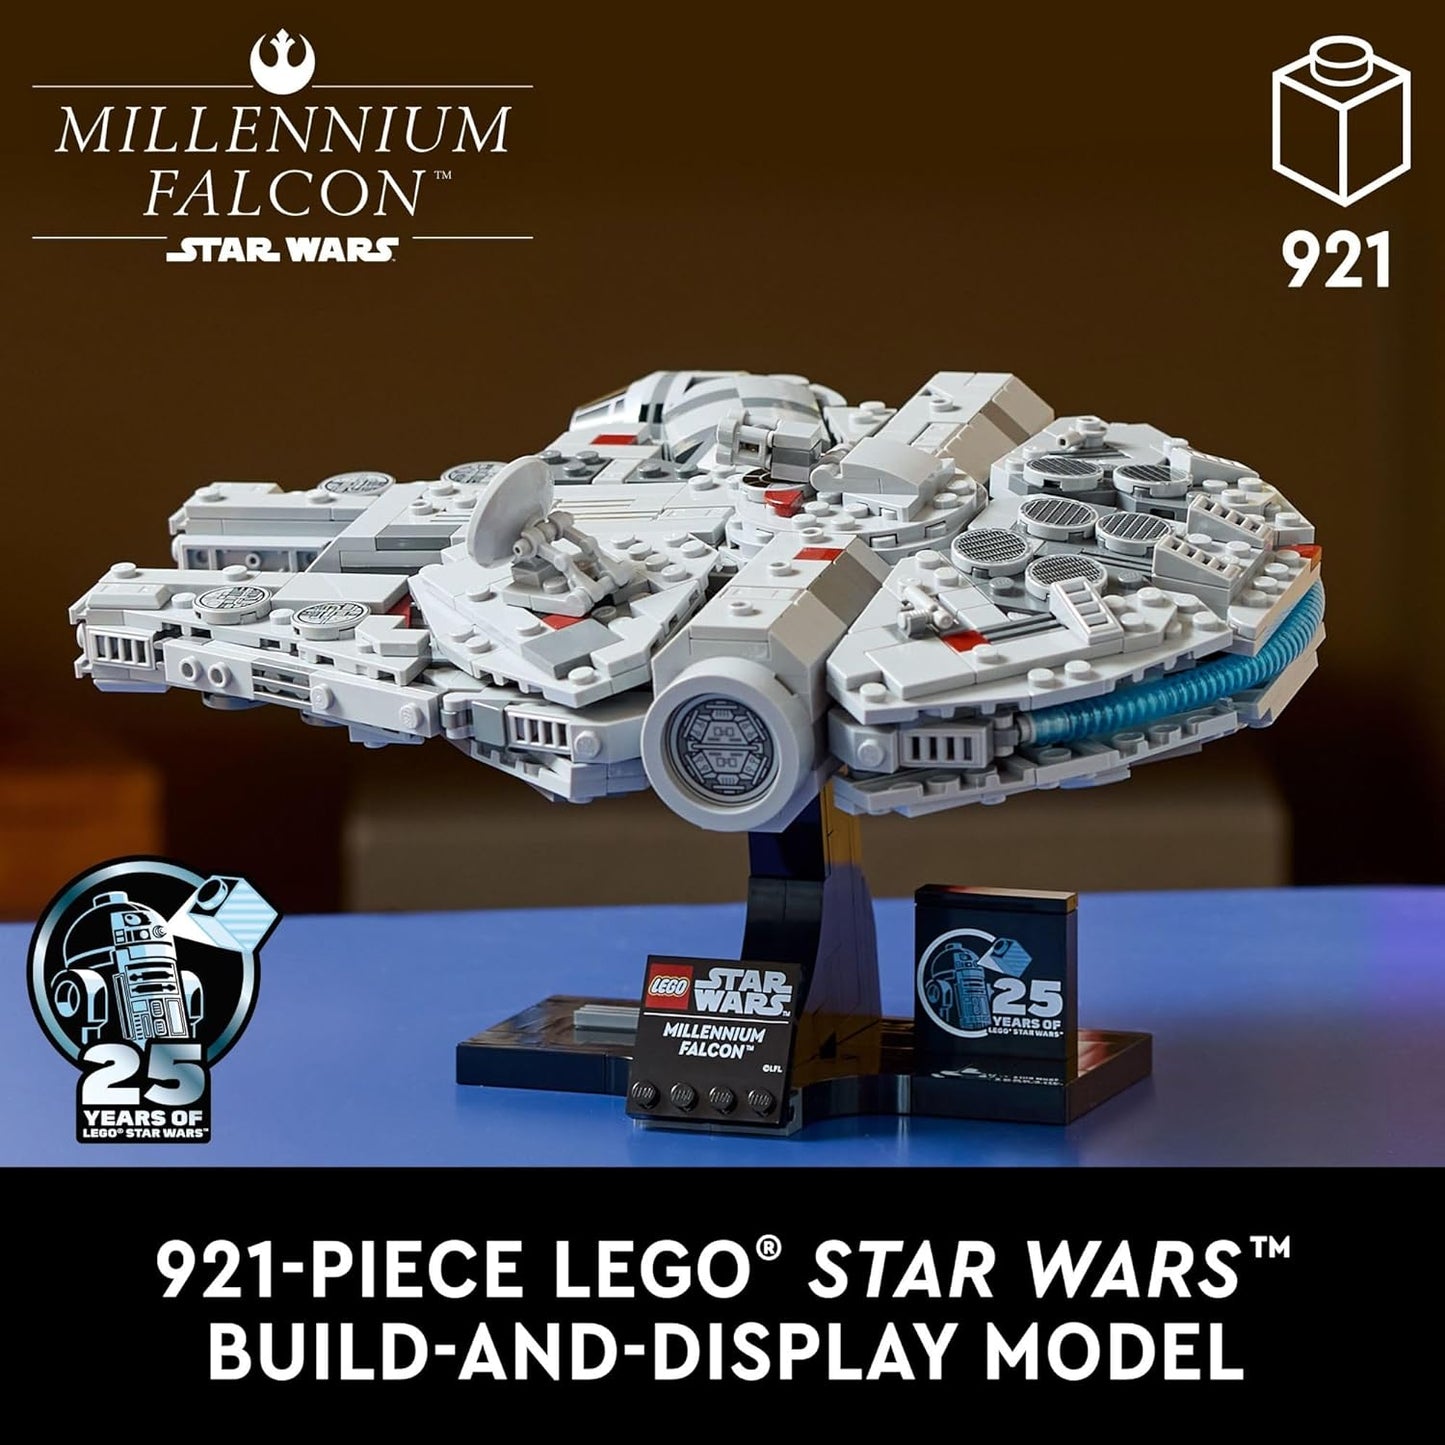 LEGO Star Wars A New Hope Millennium Falcon 25th Anniversary Buildable Starship Model, Ages 18+ Gift for Star Wars Fans, 75375